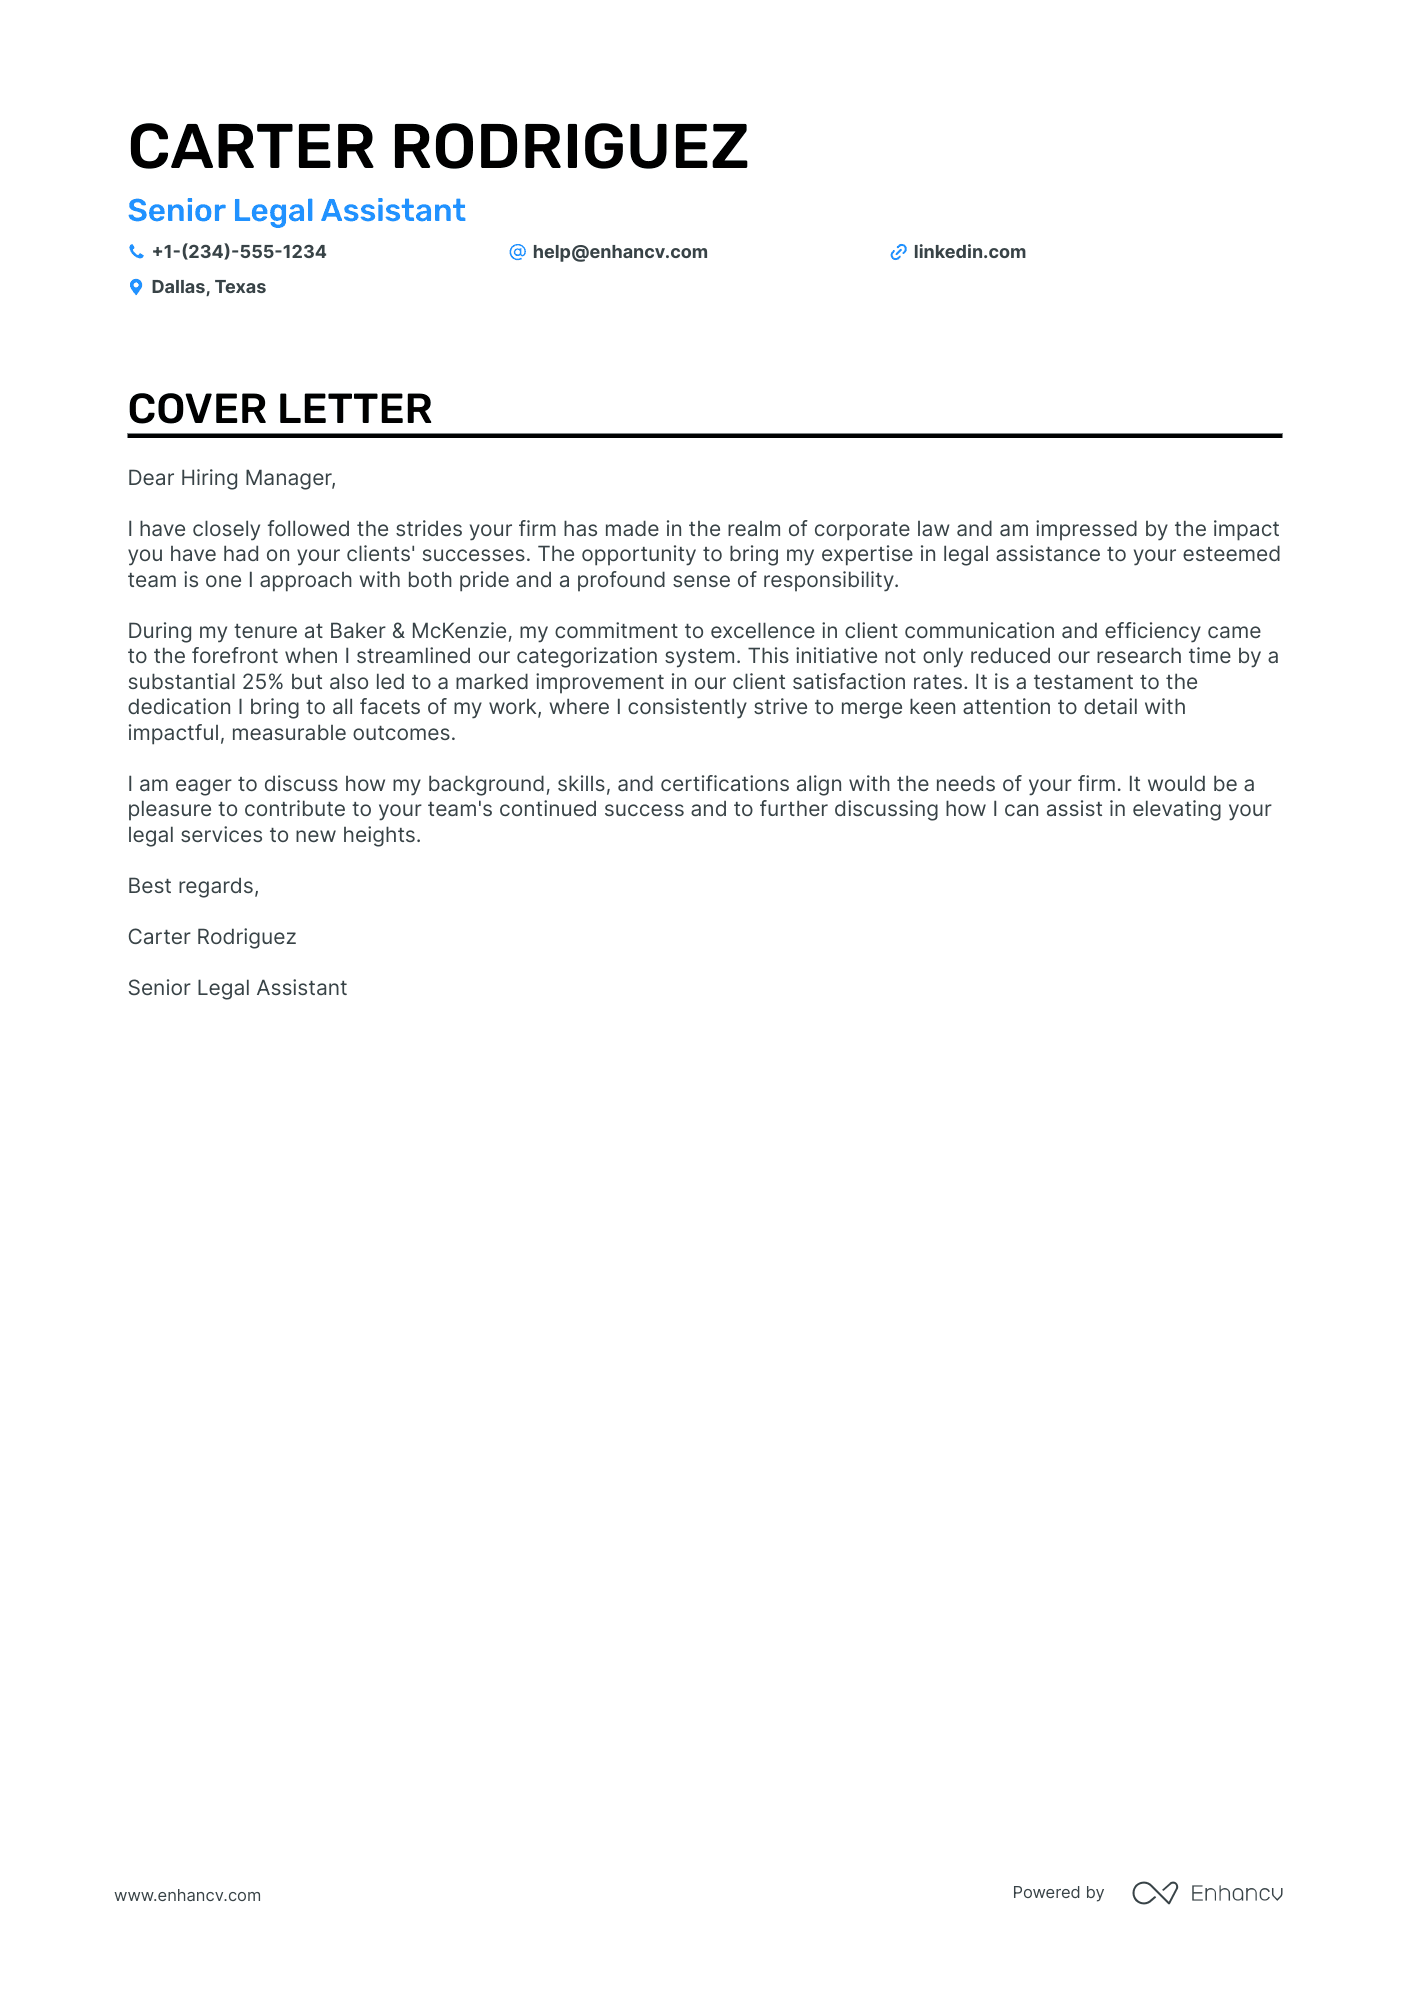 cover letter for a legal assistant position